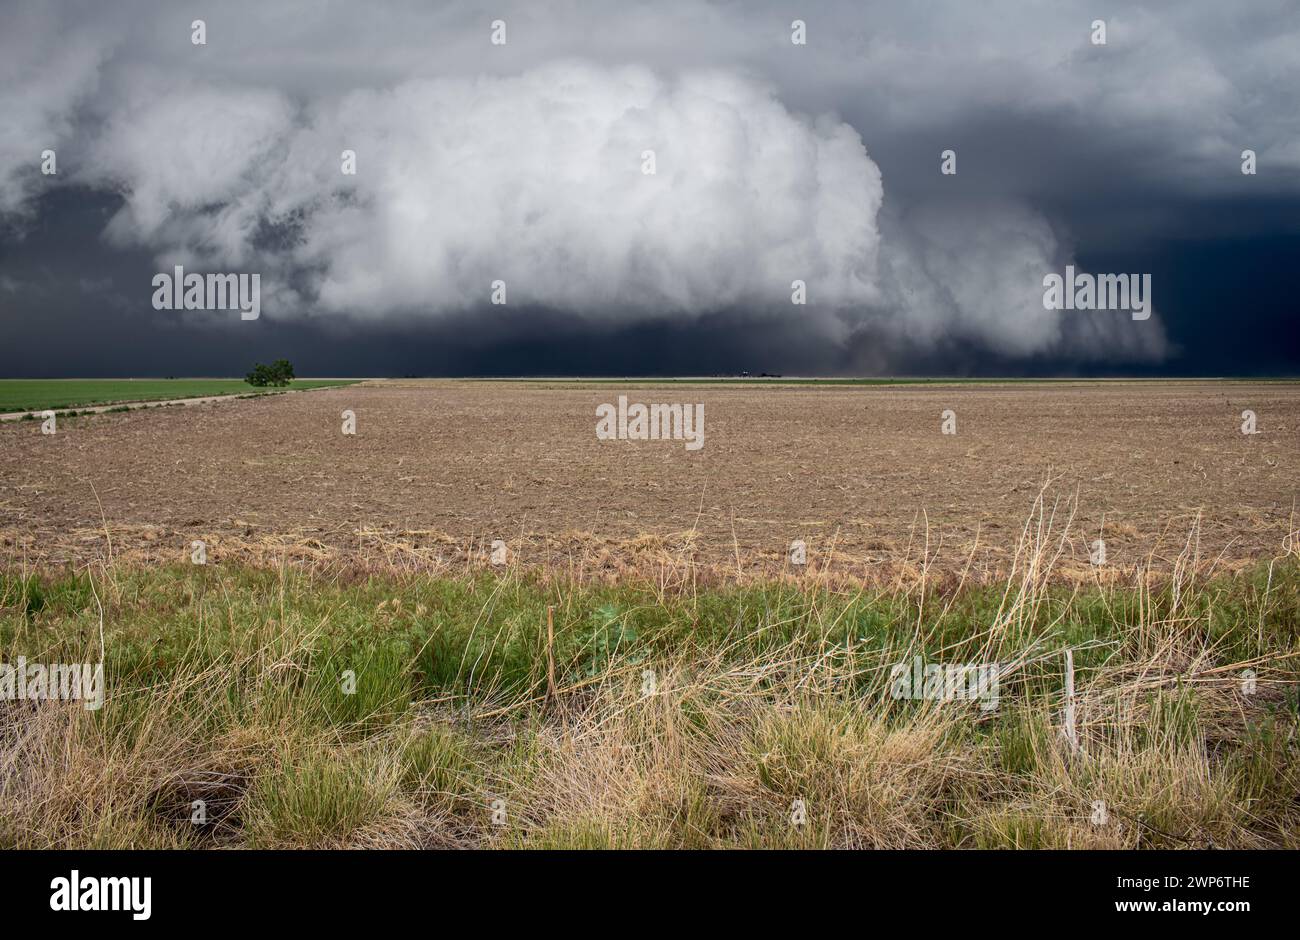 A massive, thick shelf cloud hangs low over flat farmland. A dark storm is approaching fast. Stock Photo